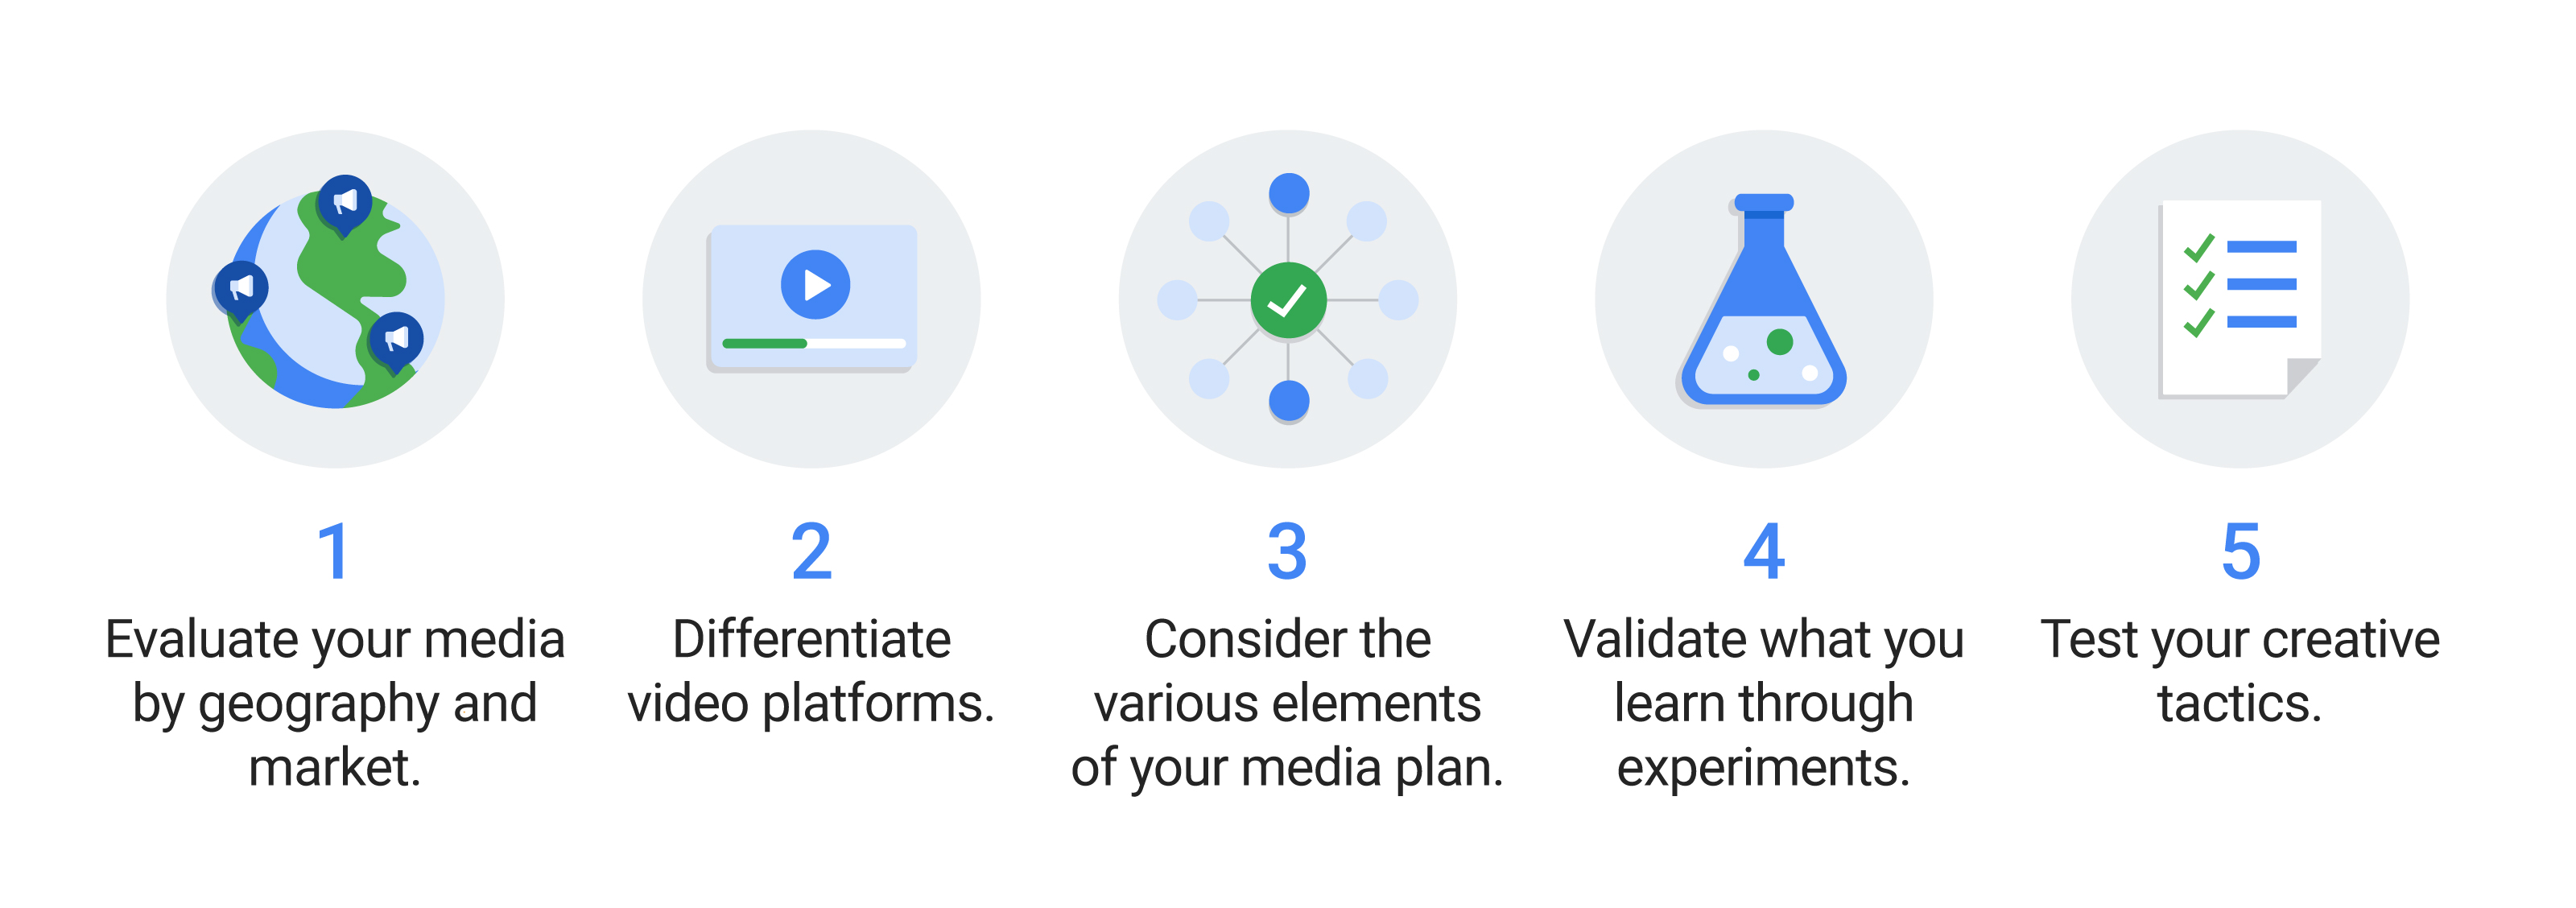 5 blue & green icons w/labels: Globe 1. Evaluate media by locale; Video player 2. Differentiate video platforms; Scatter plot 3. Consider elements of media plan; Erlenmeyer flask 4. Validate with experiments; Checklist 5. Test creative tactics.